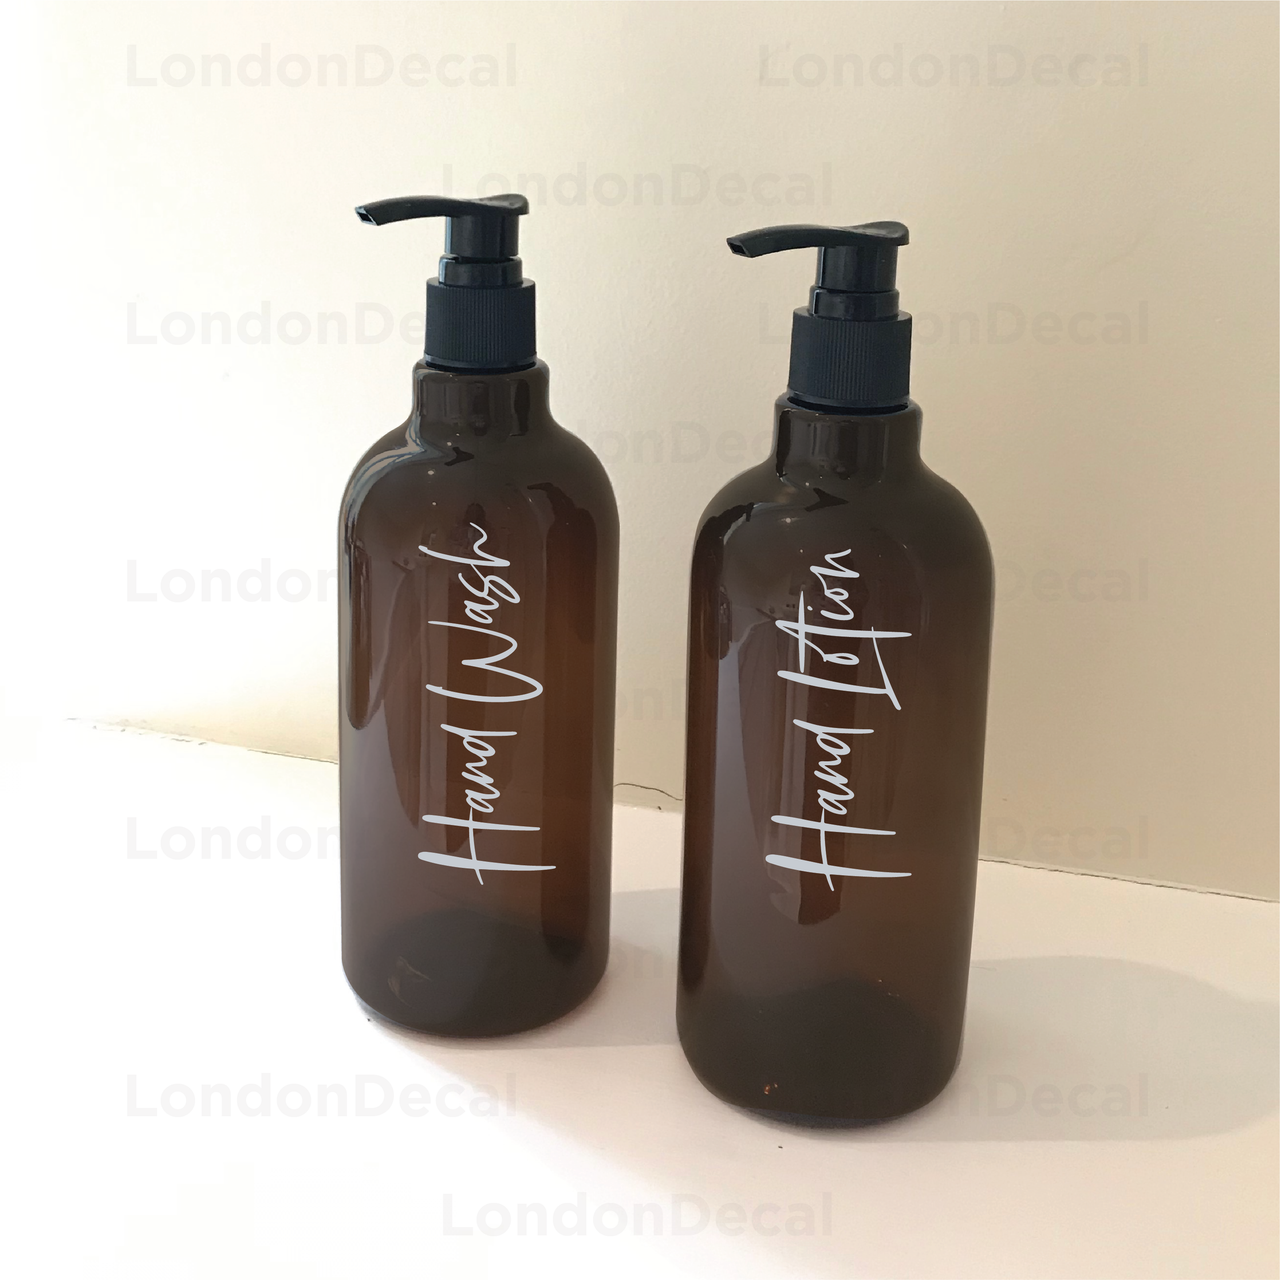 HAND WASH and HAND LOTION - Mrs Hinch inspired bottle decal stickers (Type 2)